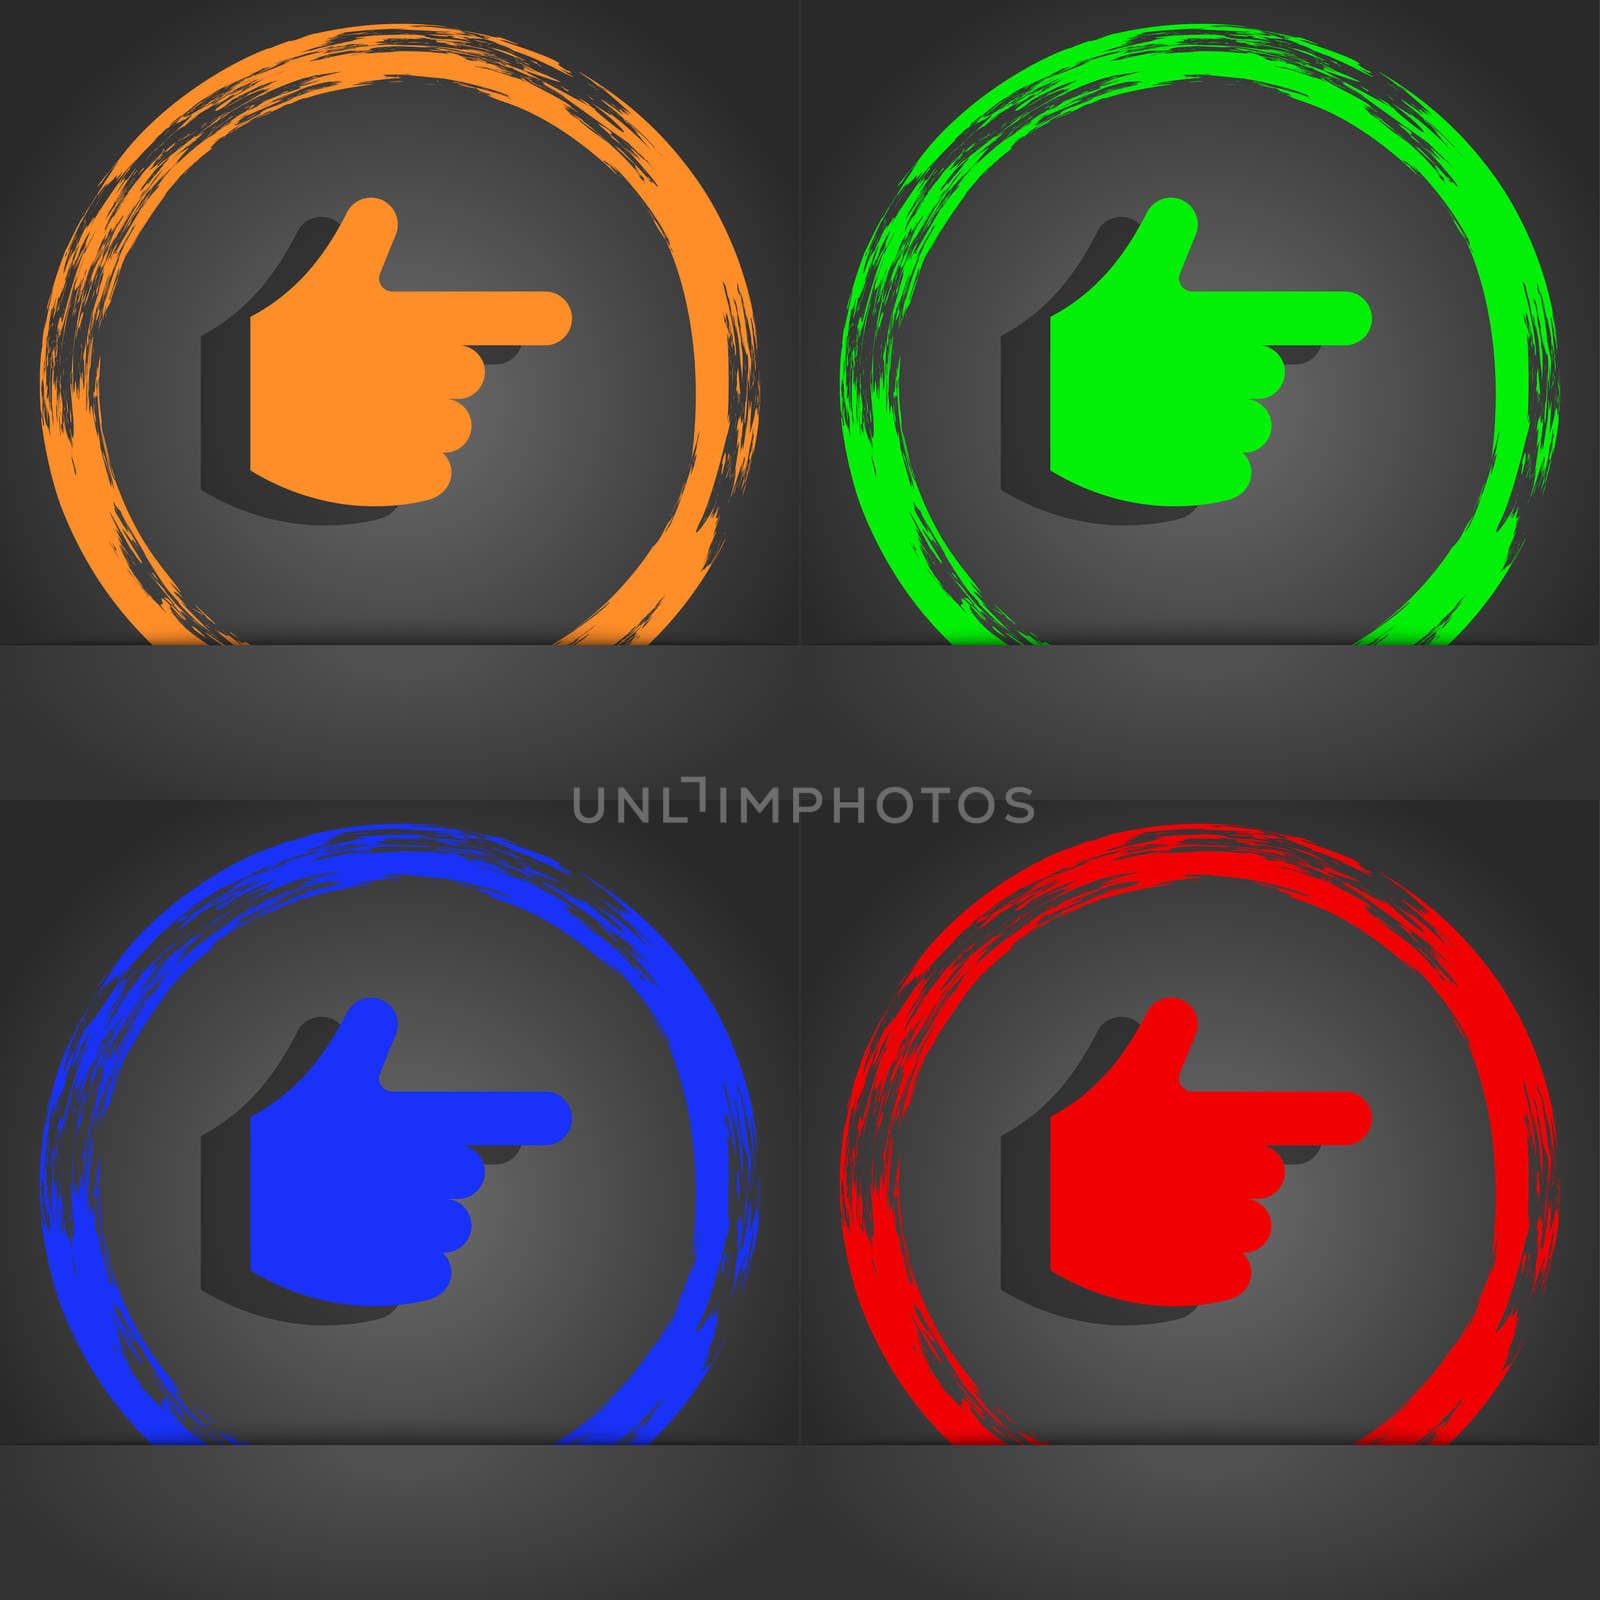 pointing hand icon symbol. Fashionable modern style. In the orange, green, blue, green design. illustration